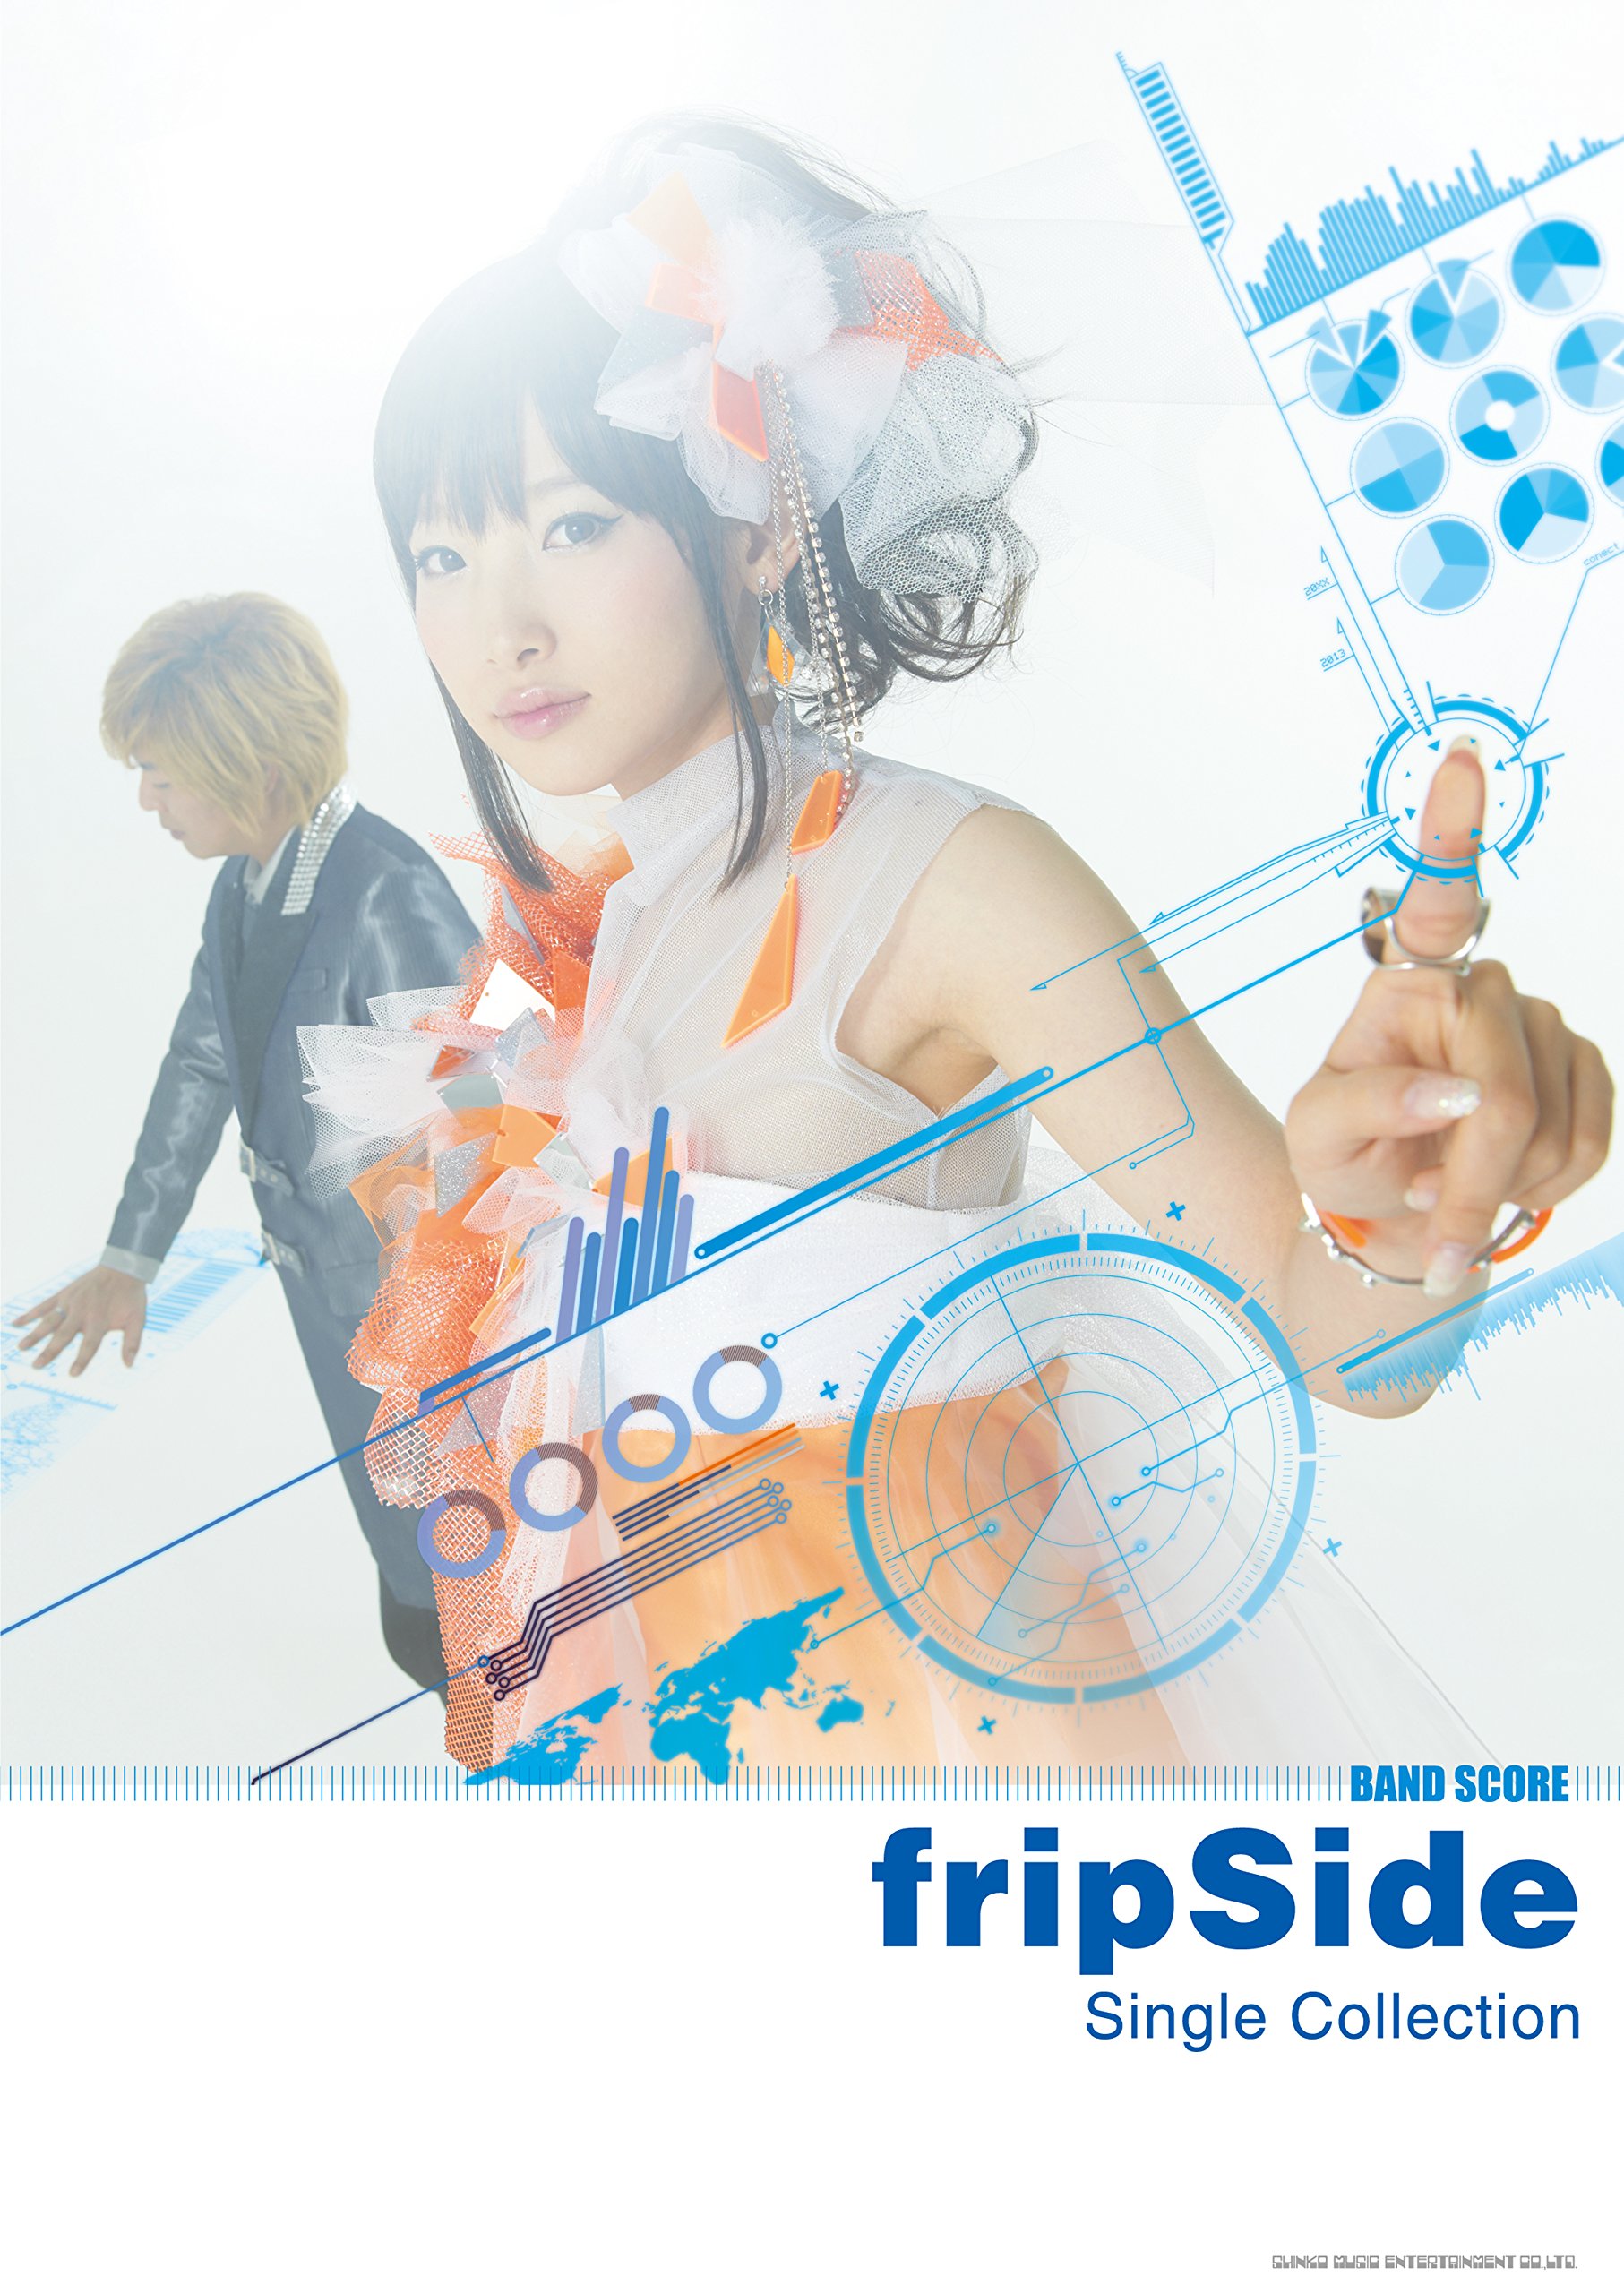 fripSide Single Collection-epfllc.ae